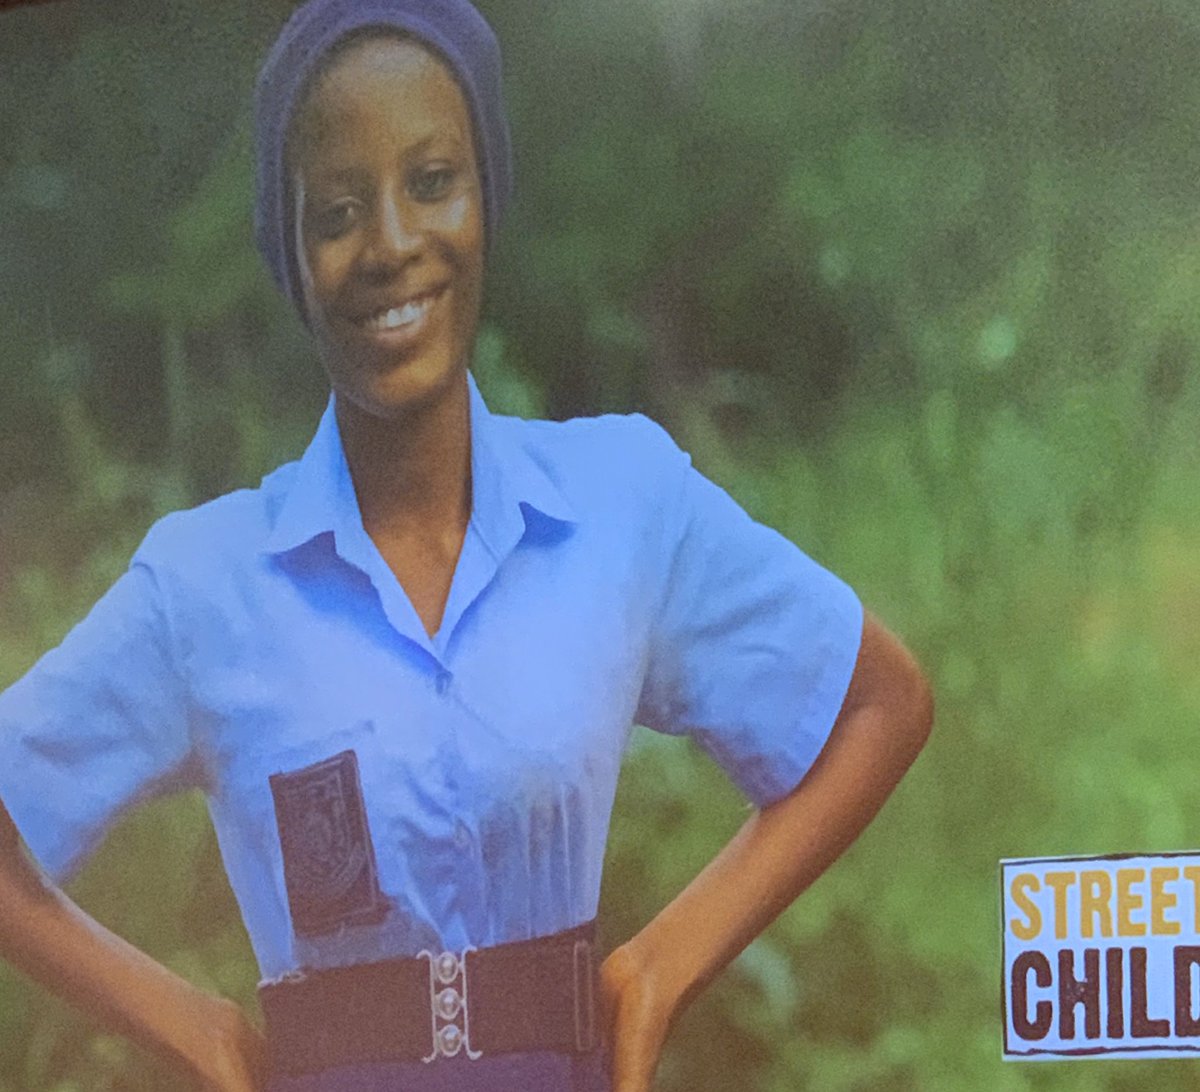 The Family Business Scheme at @streetchilduk works with women who have benefitted from business grants to explain the opportunities and challenges of running an enterprise to interested families #WISE19 #WISEPrize @WISE_Tweets